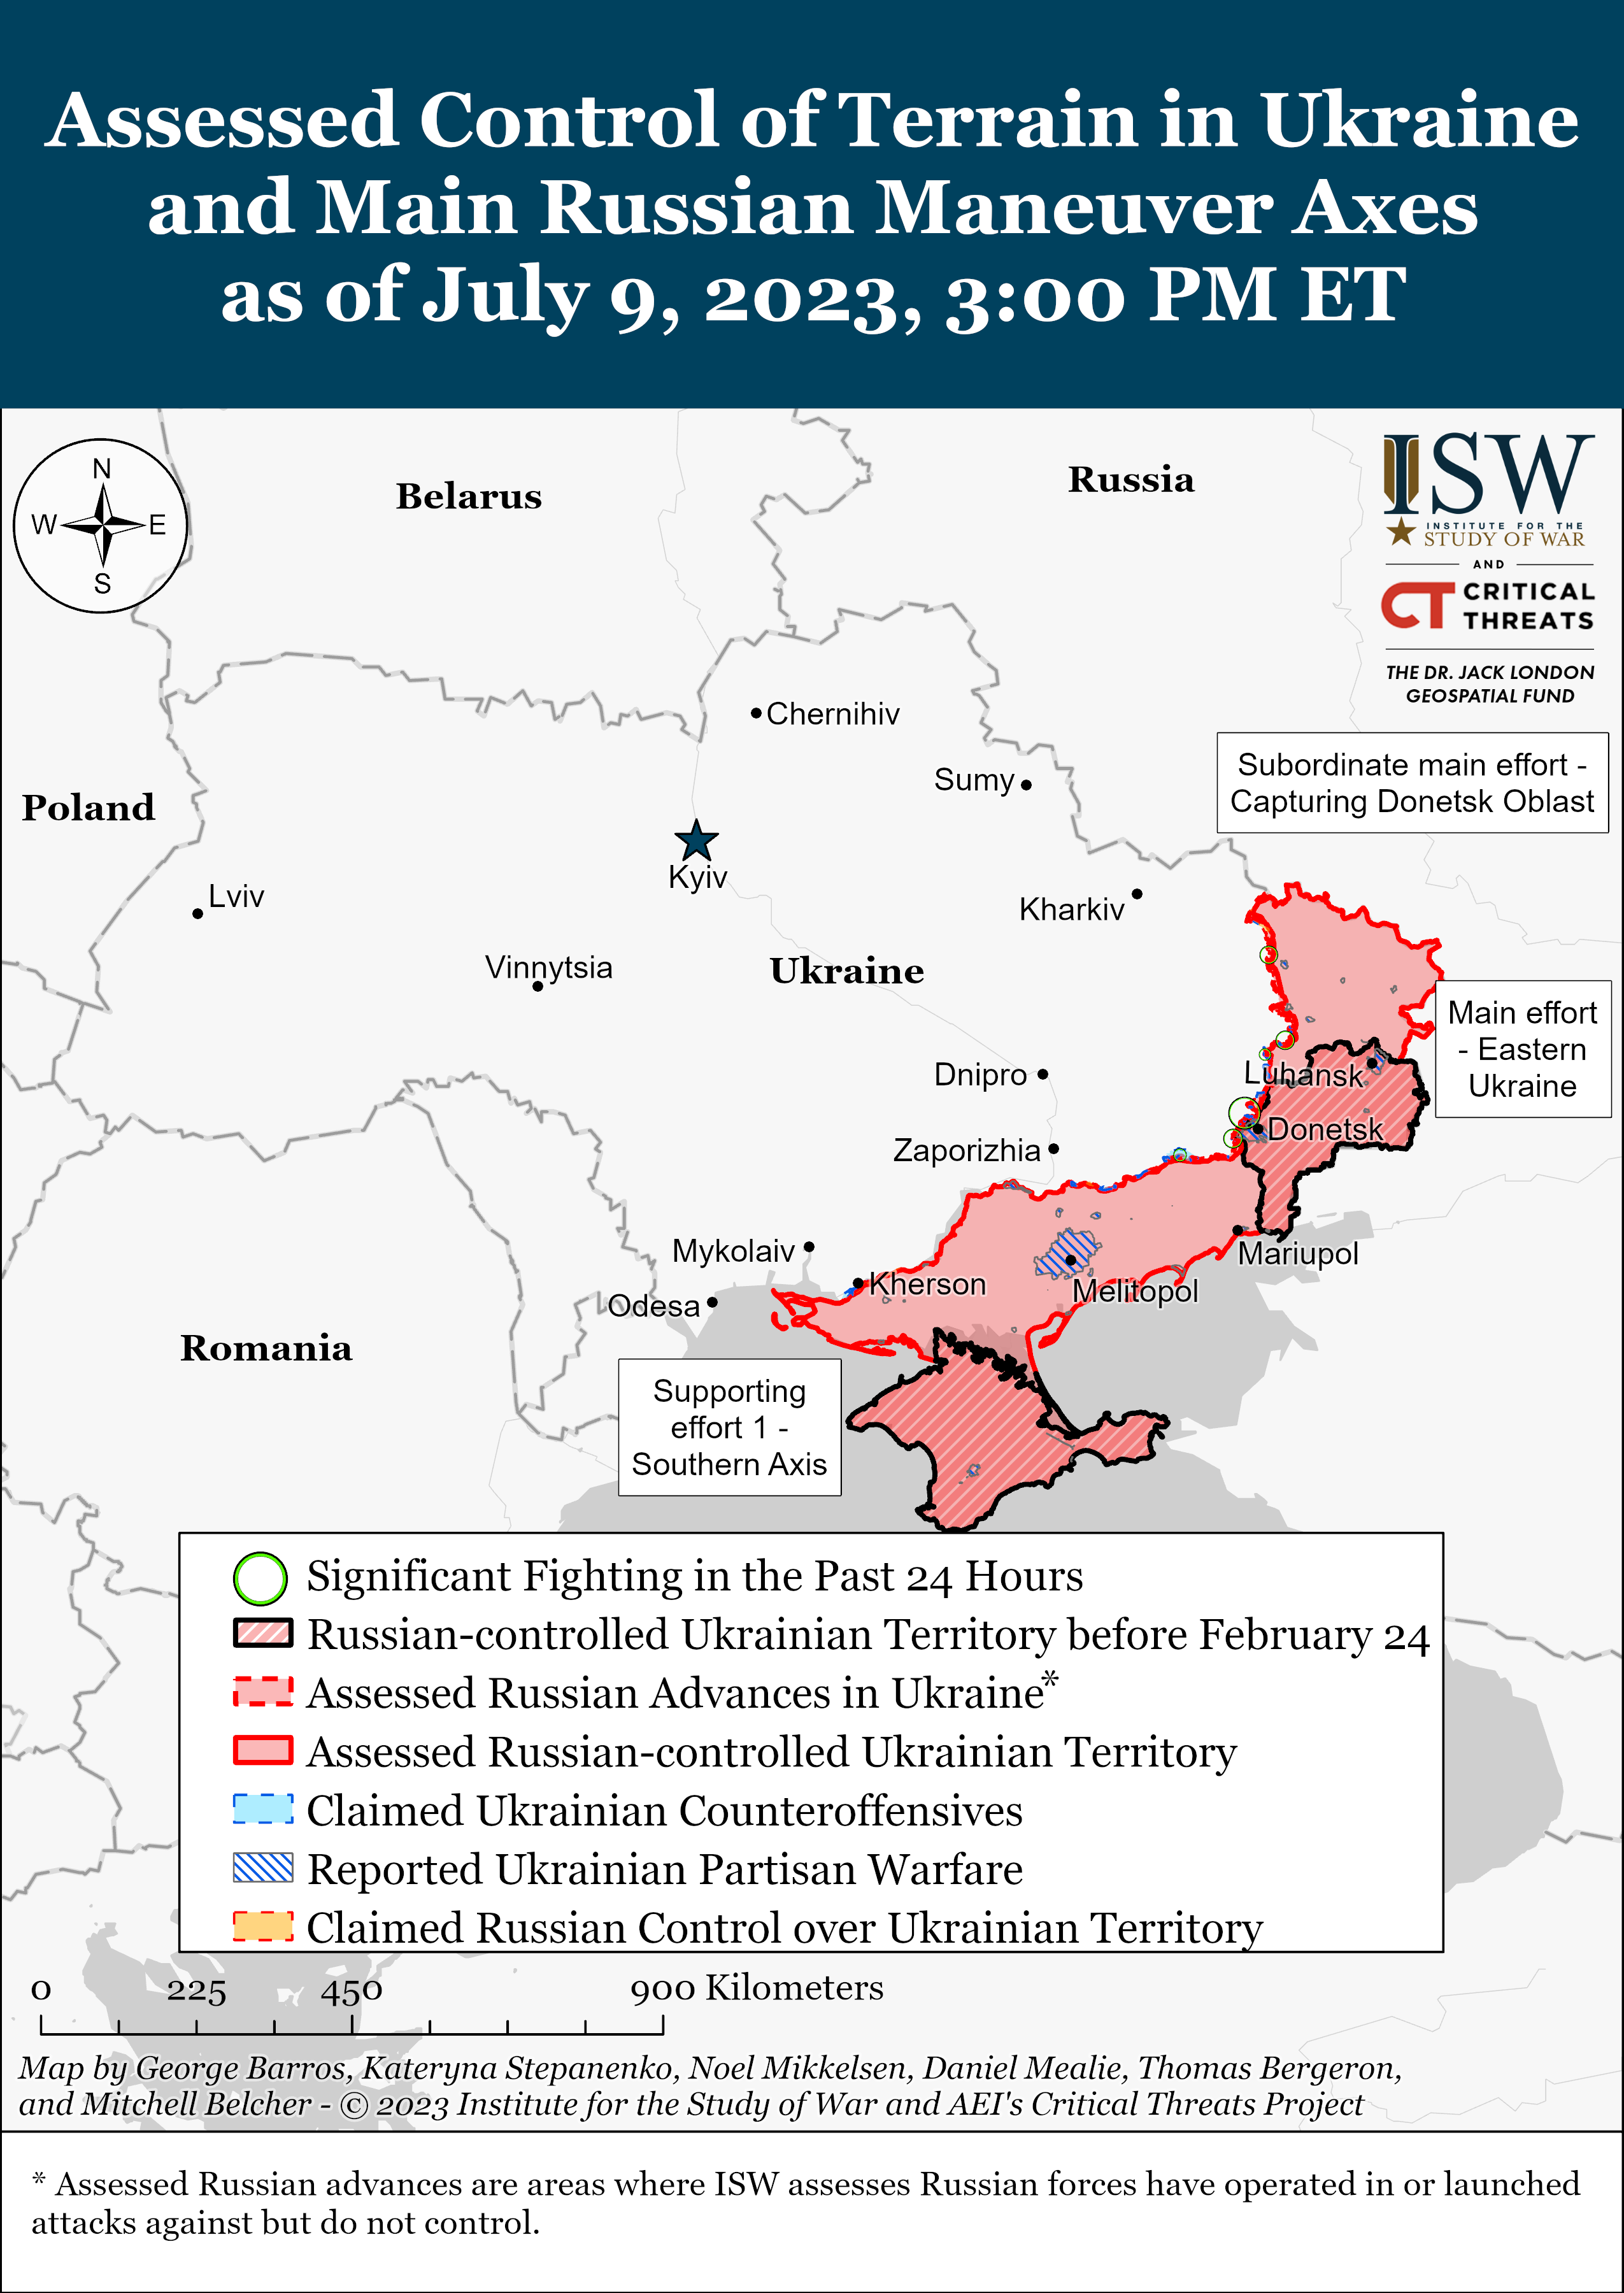 Russian Offensive Campaign Assessment, July 10, 2023